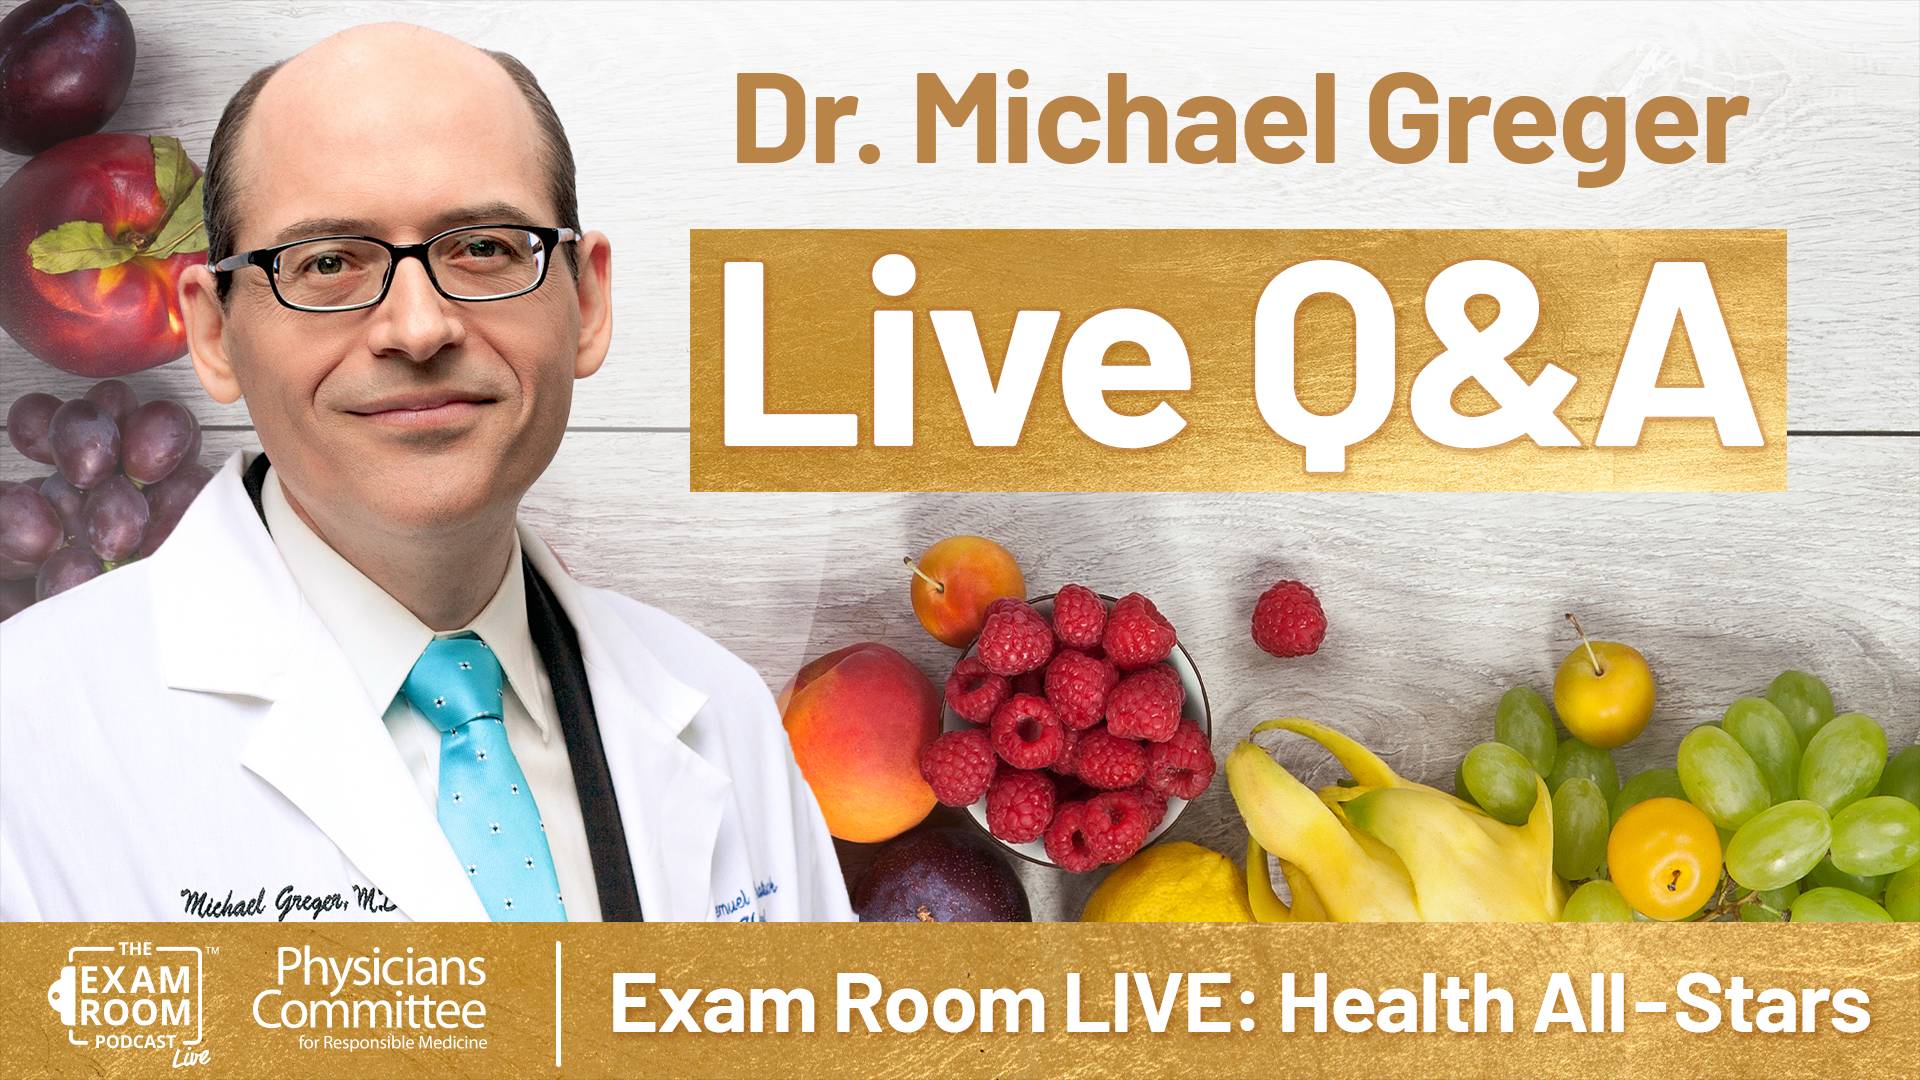 A Dozen Ideas for Health with Dr. Michael Greger | Health All-Stars Series